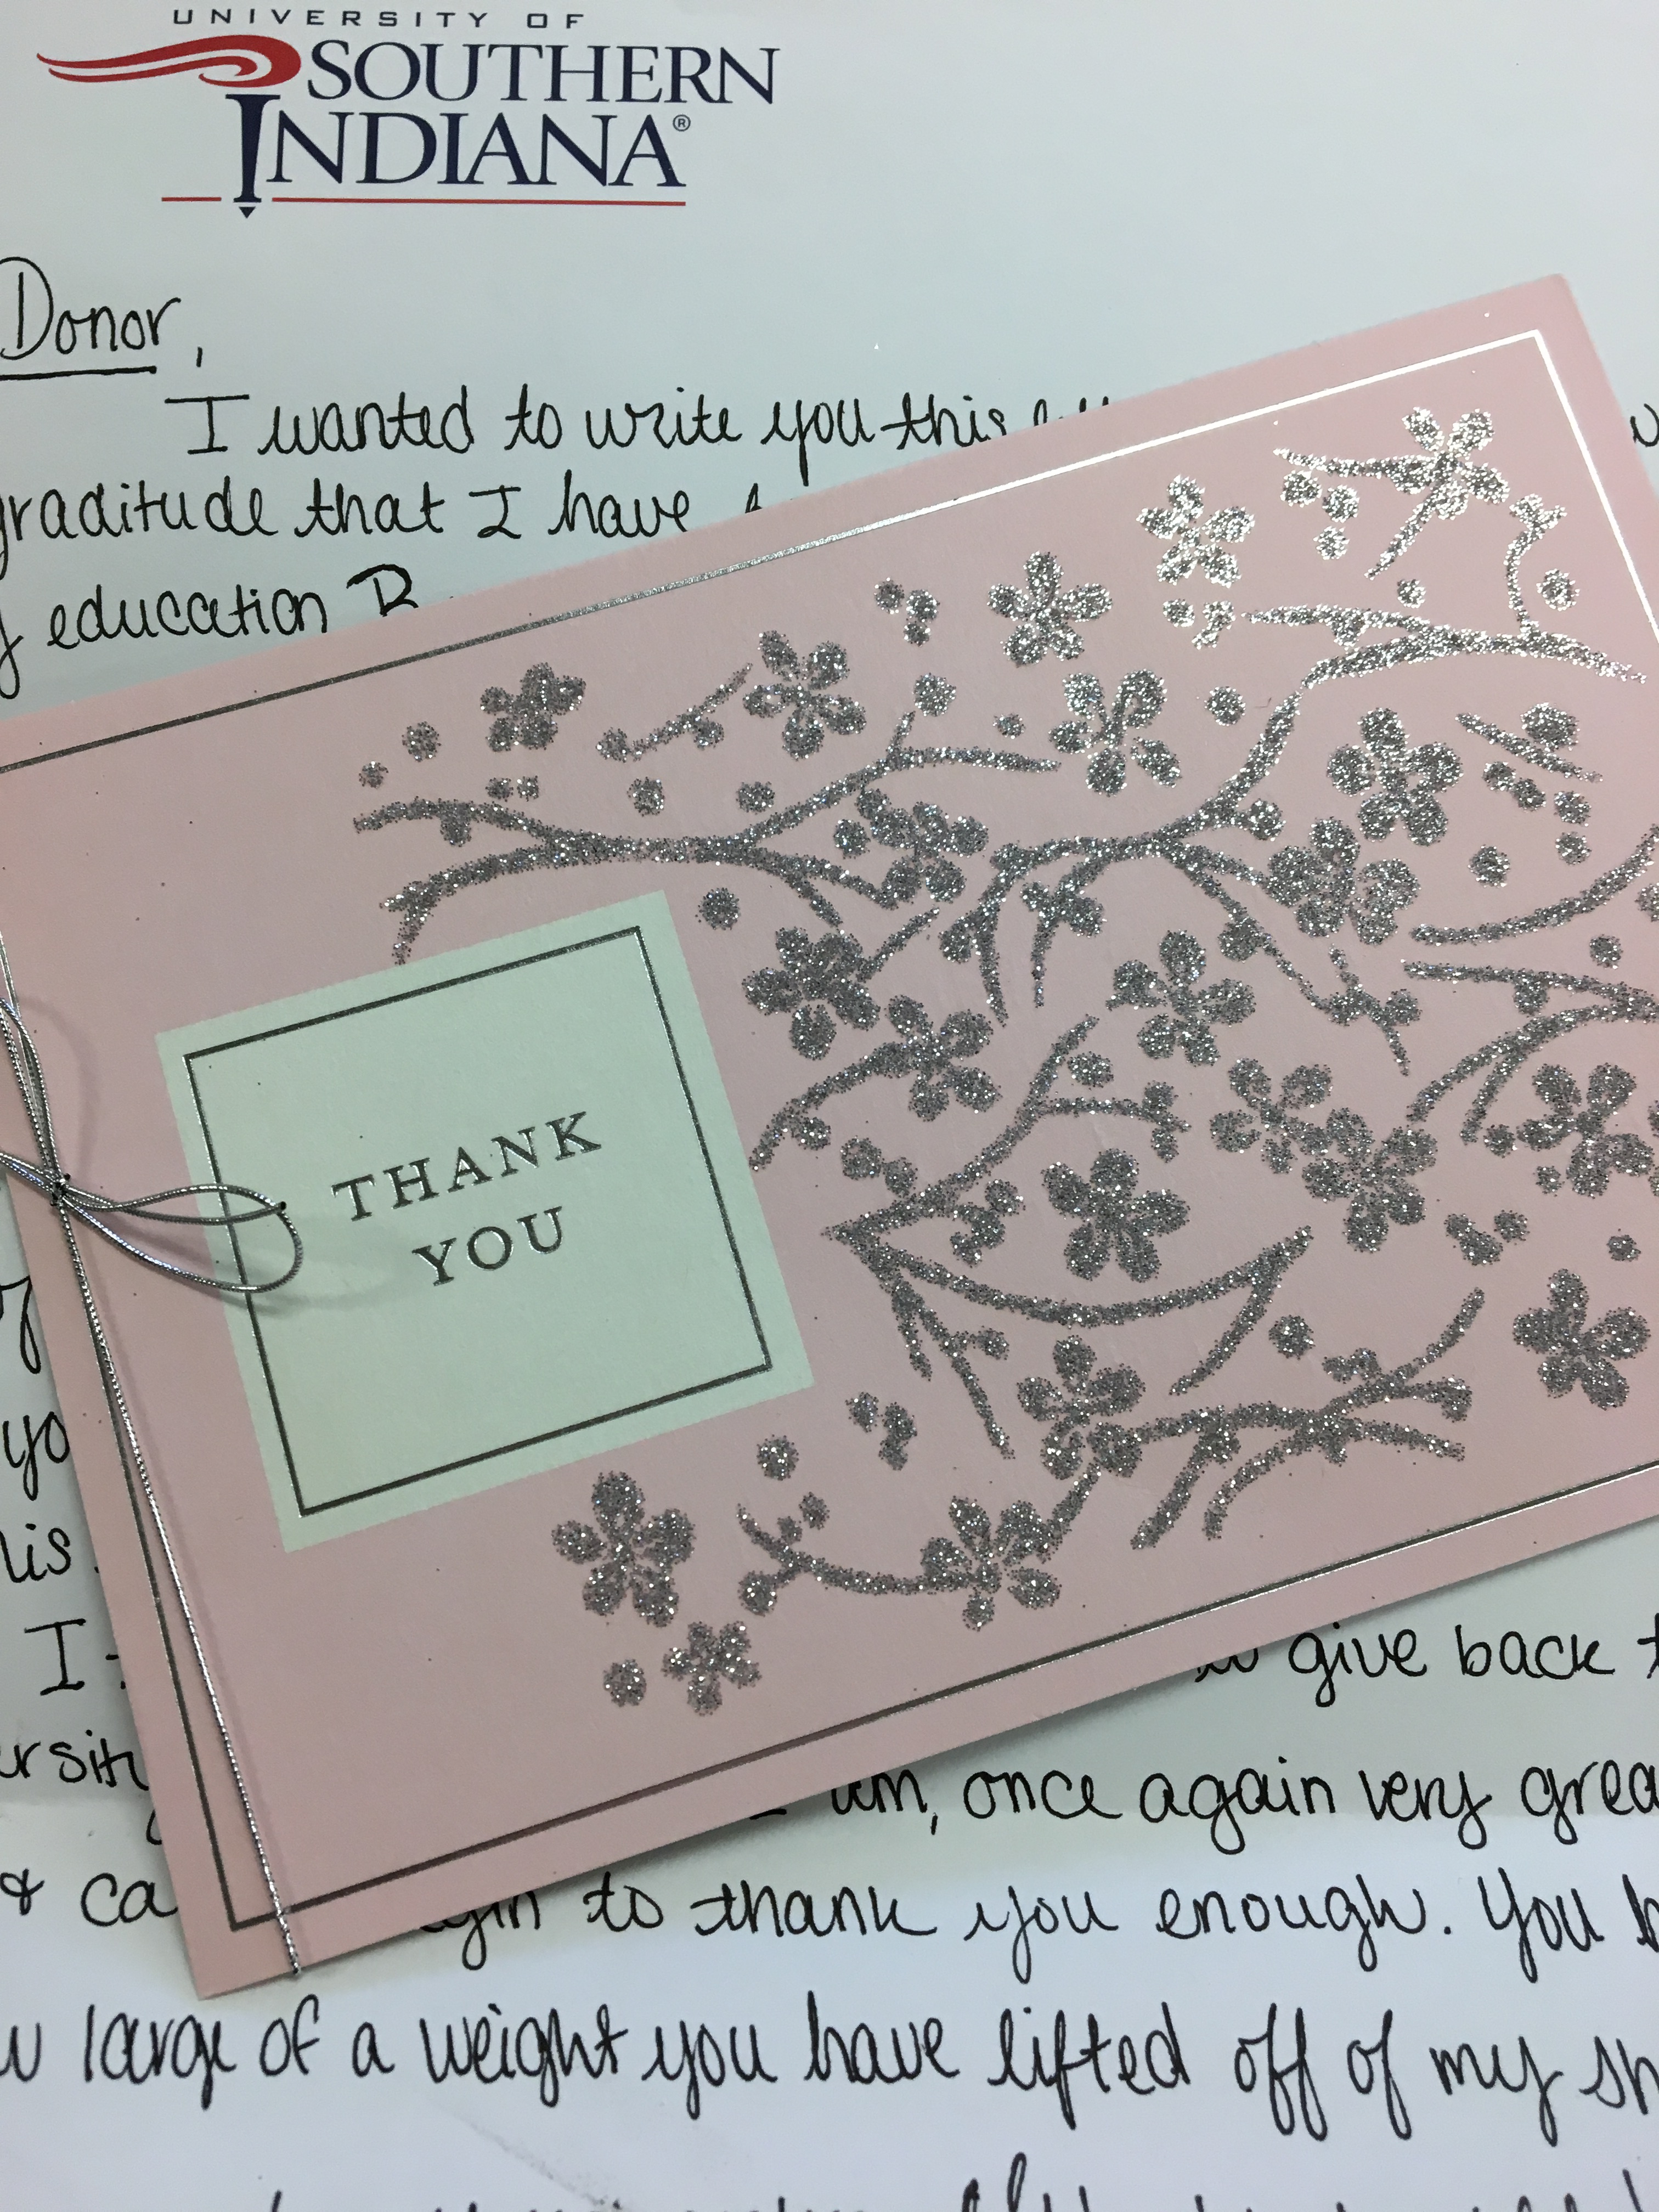 Administrative Assistants and Associates thank you notes from past recipients